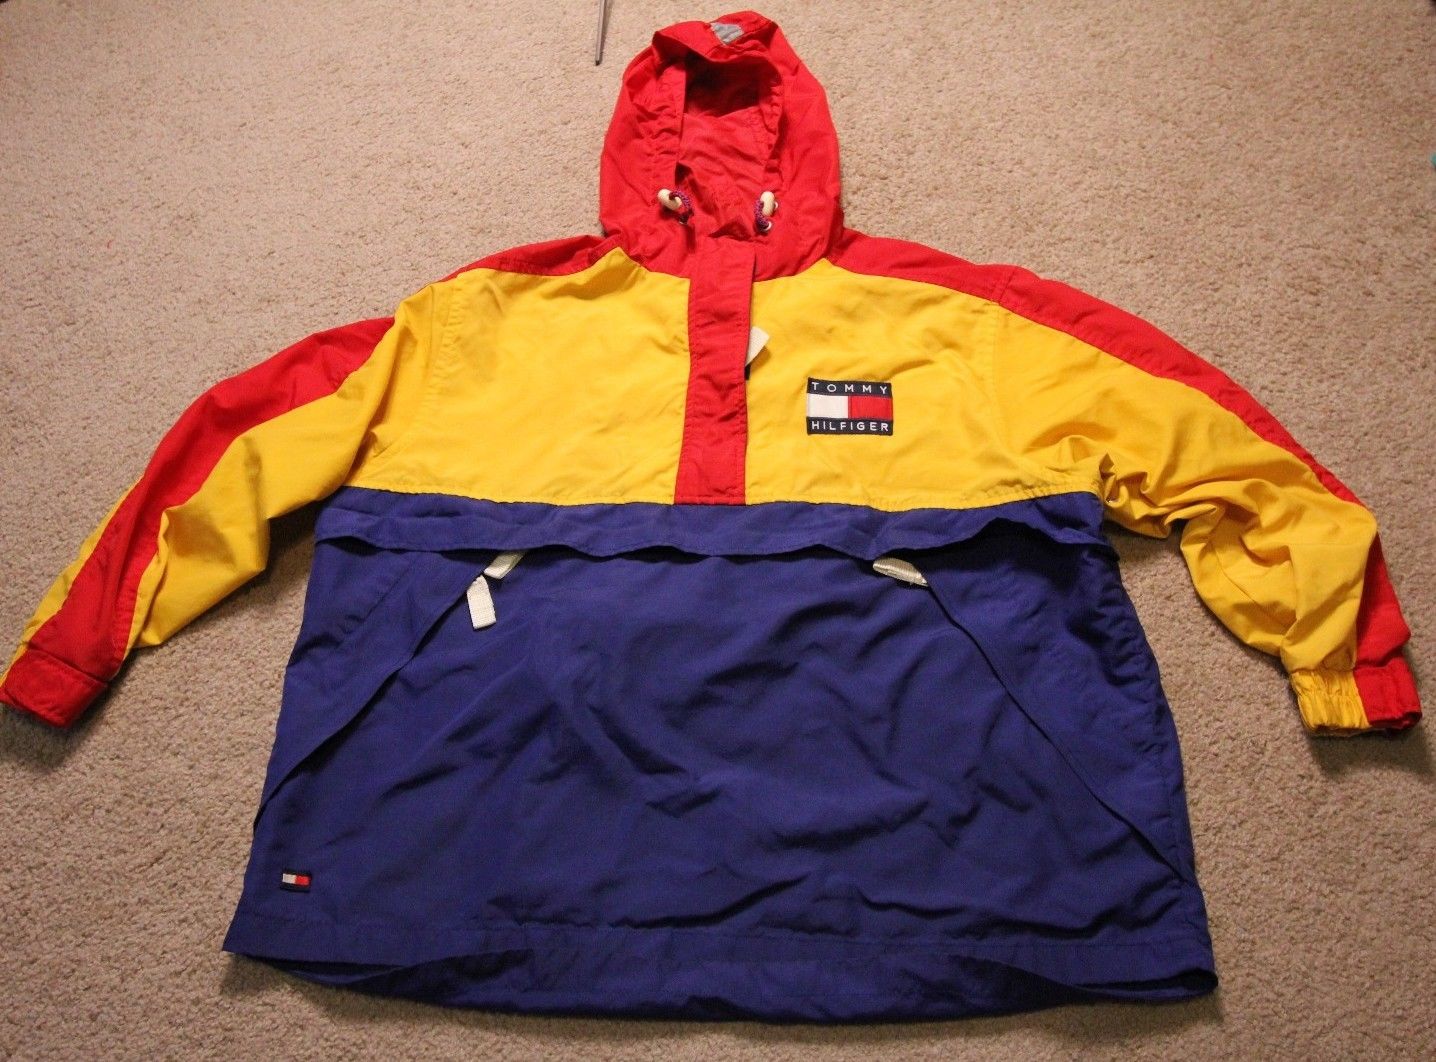 Five Tommy Jackets eBay Right Now